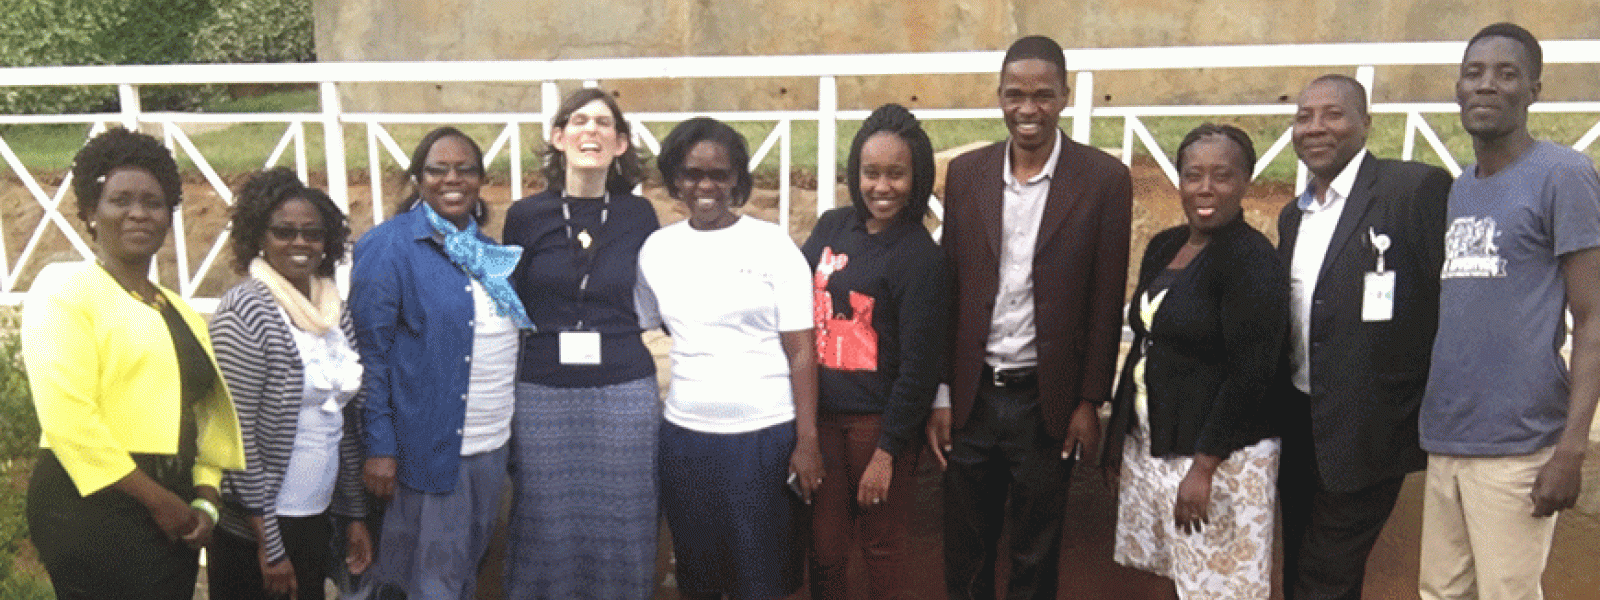 my Flickner with staff from CURE International Hospital in Kijabe, Kenya. 